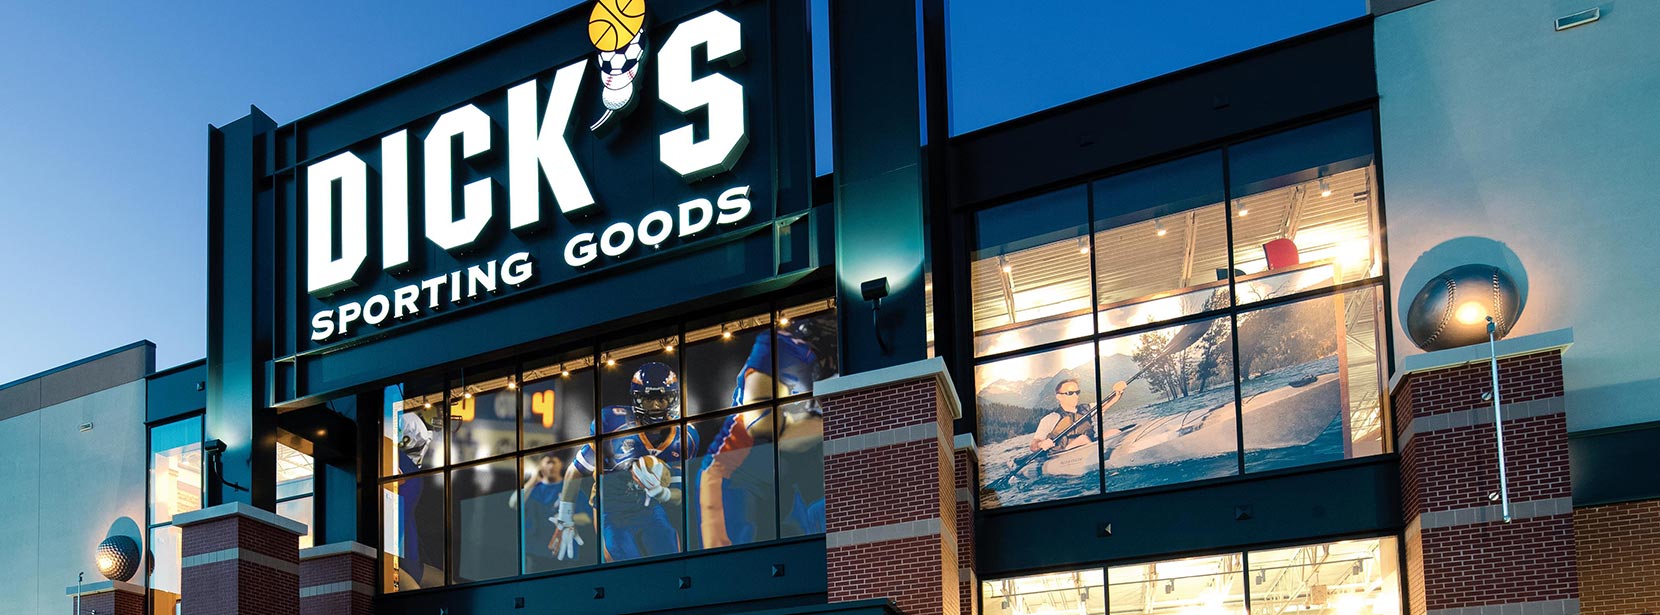 DICK'S Sporting Goods Holiday Hours | DICK'S Sporting Goods